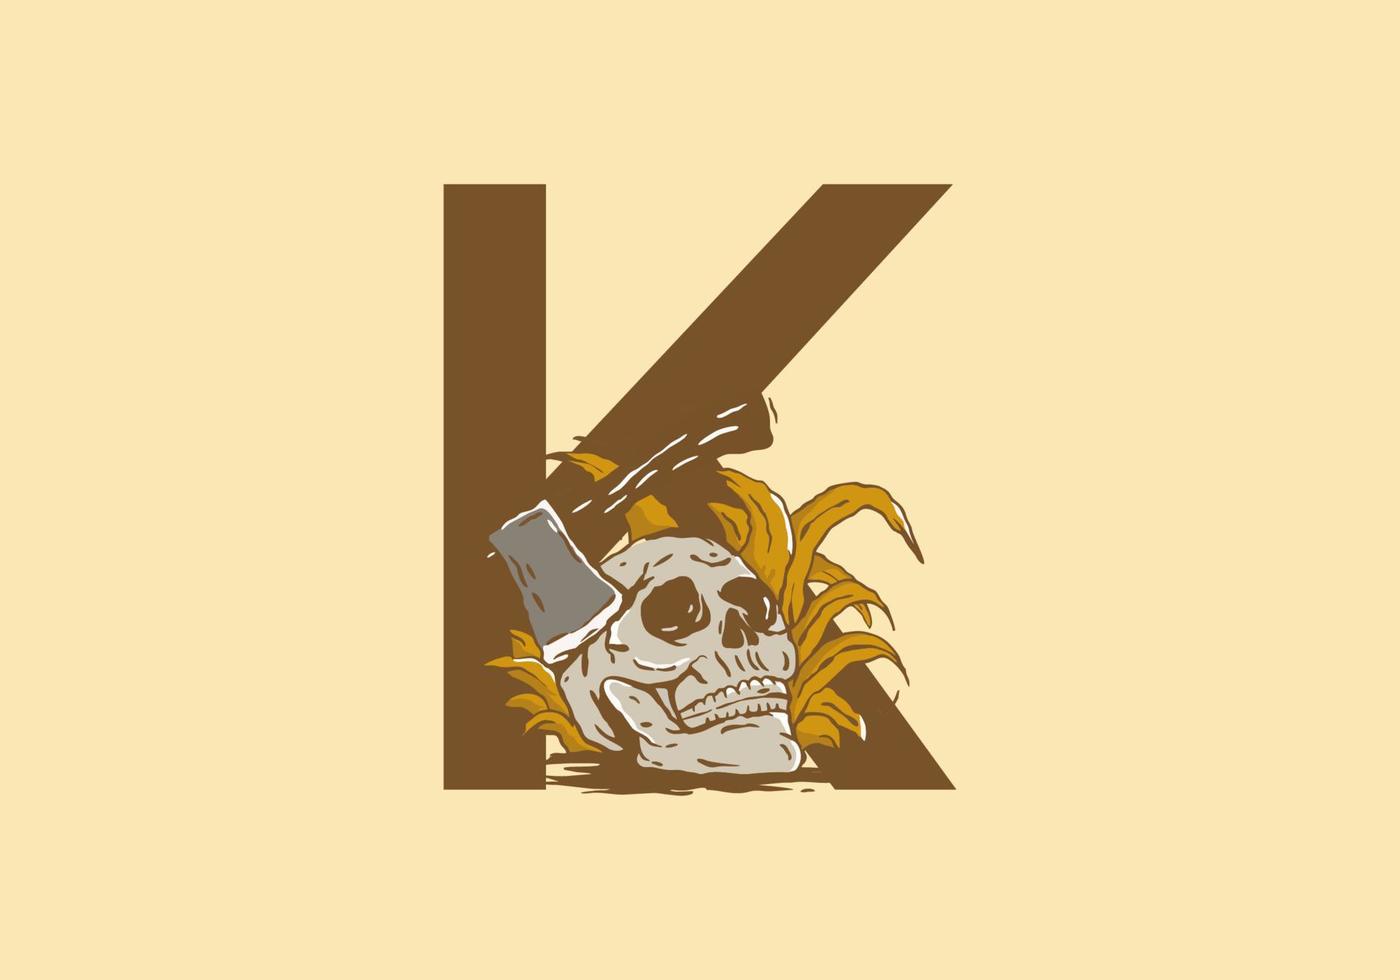 Skeleton head and ax illustration drawing with K initial letter vector